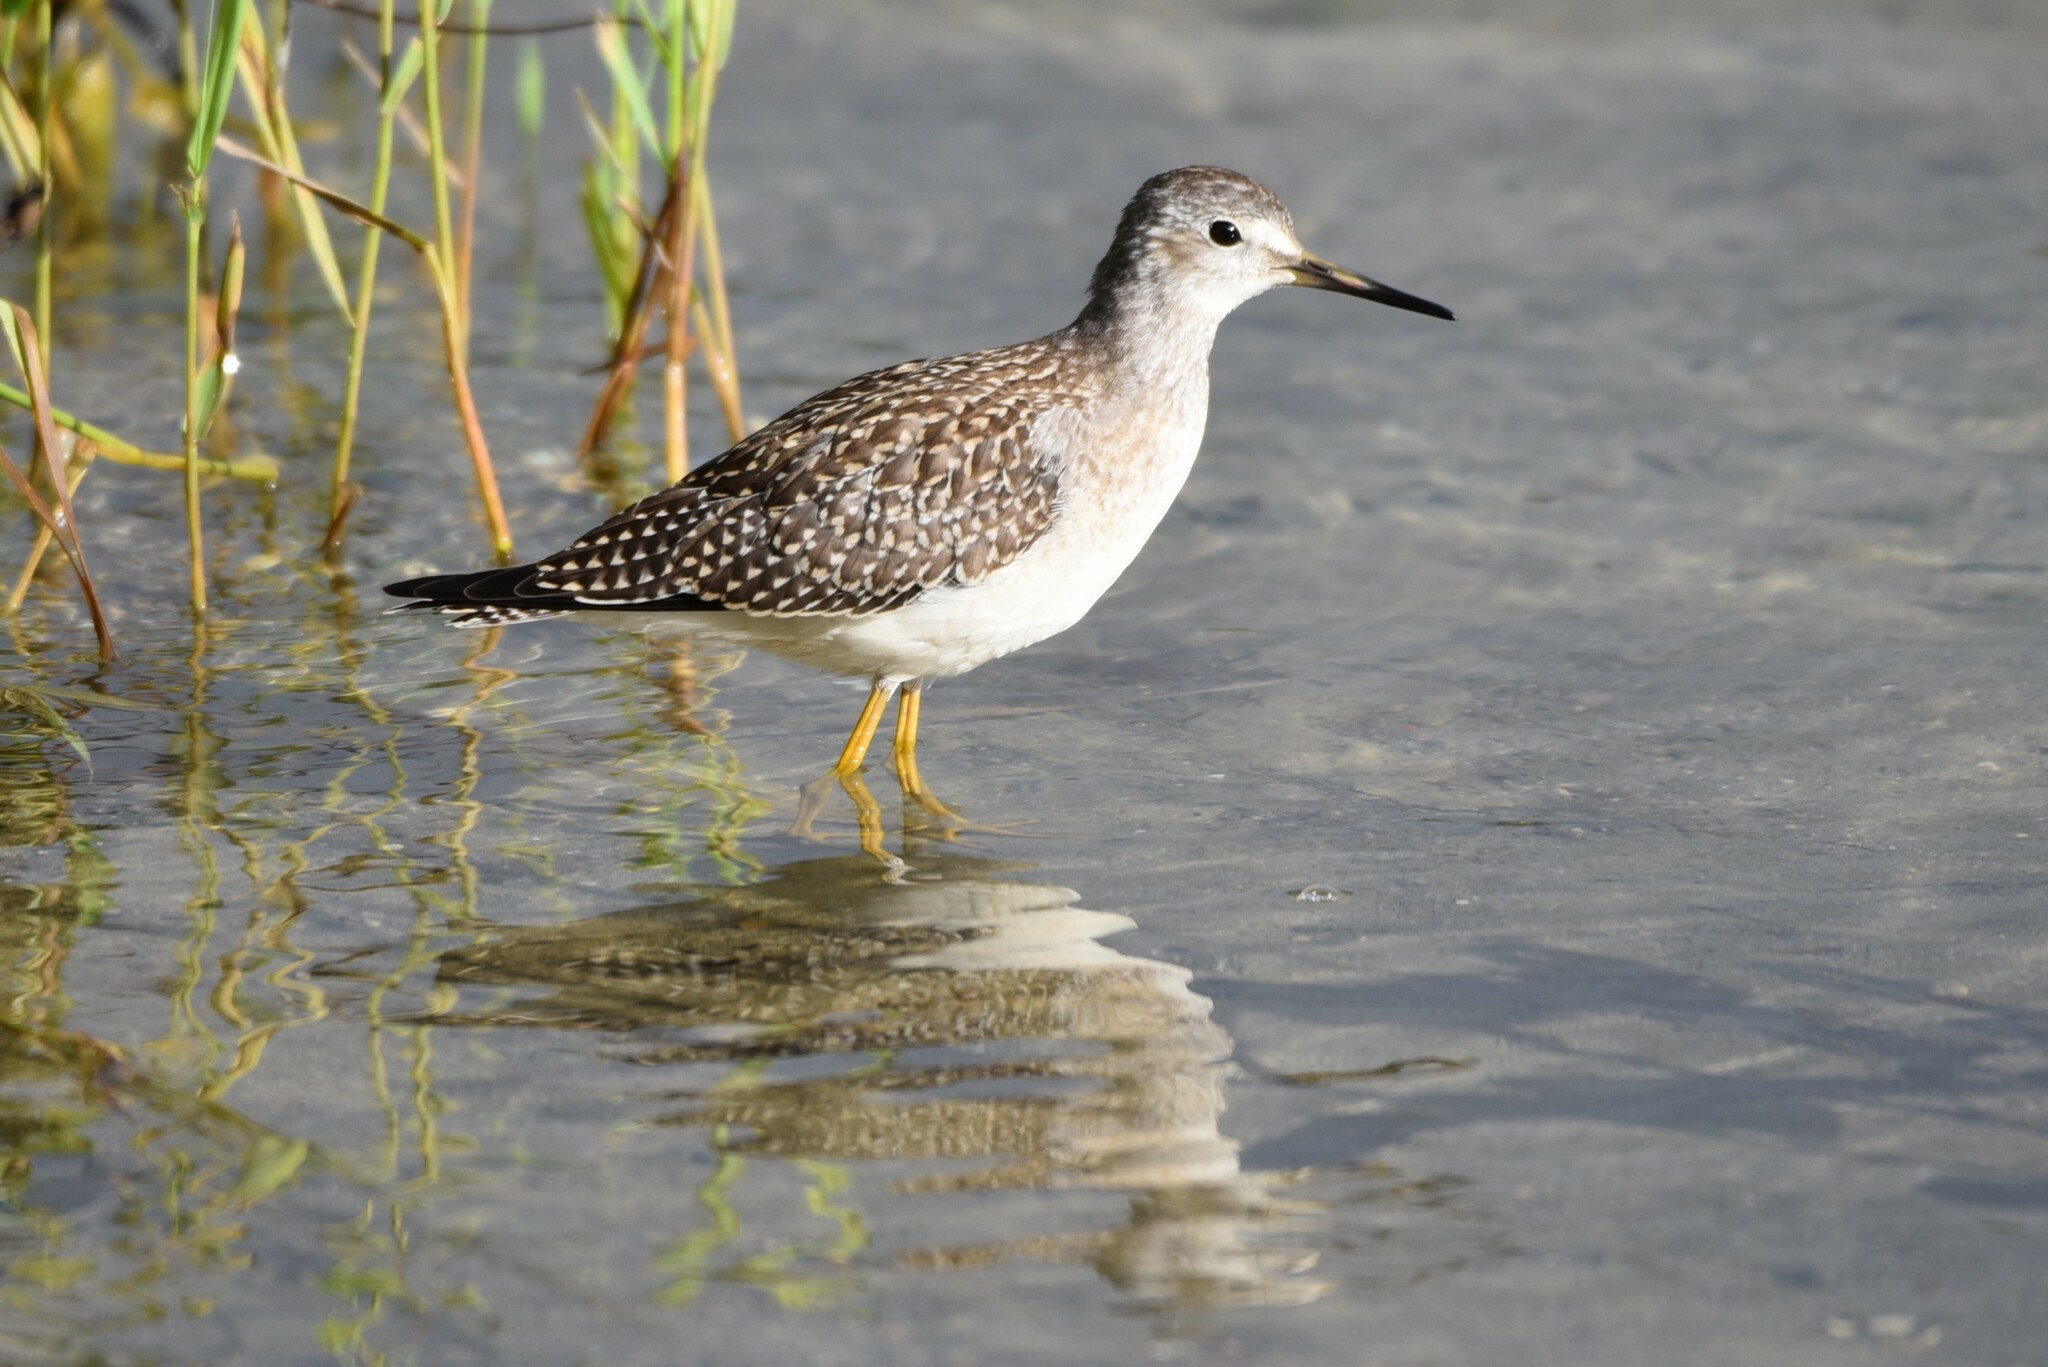 A lesser yellowlegs wading in water